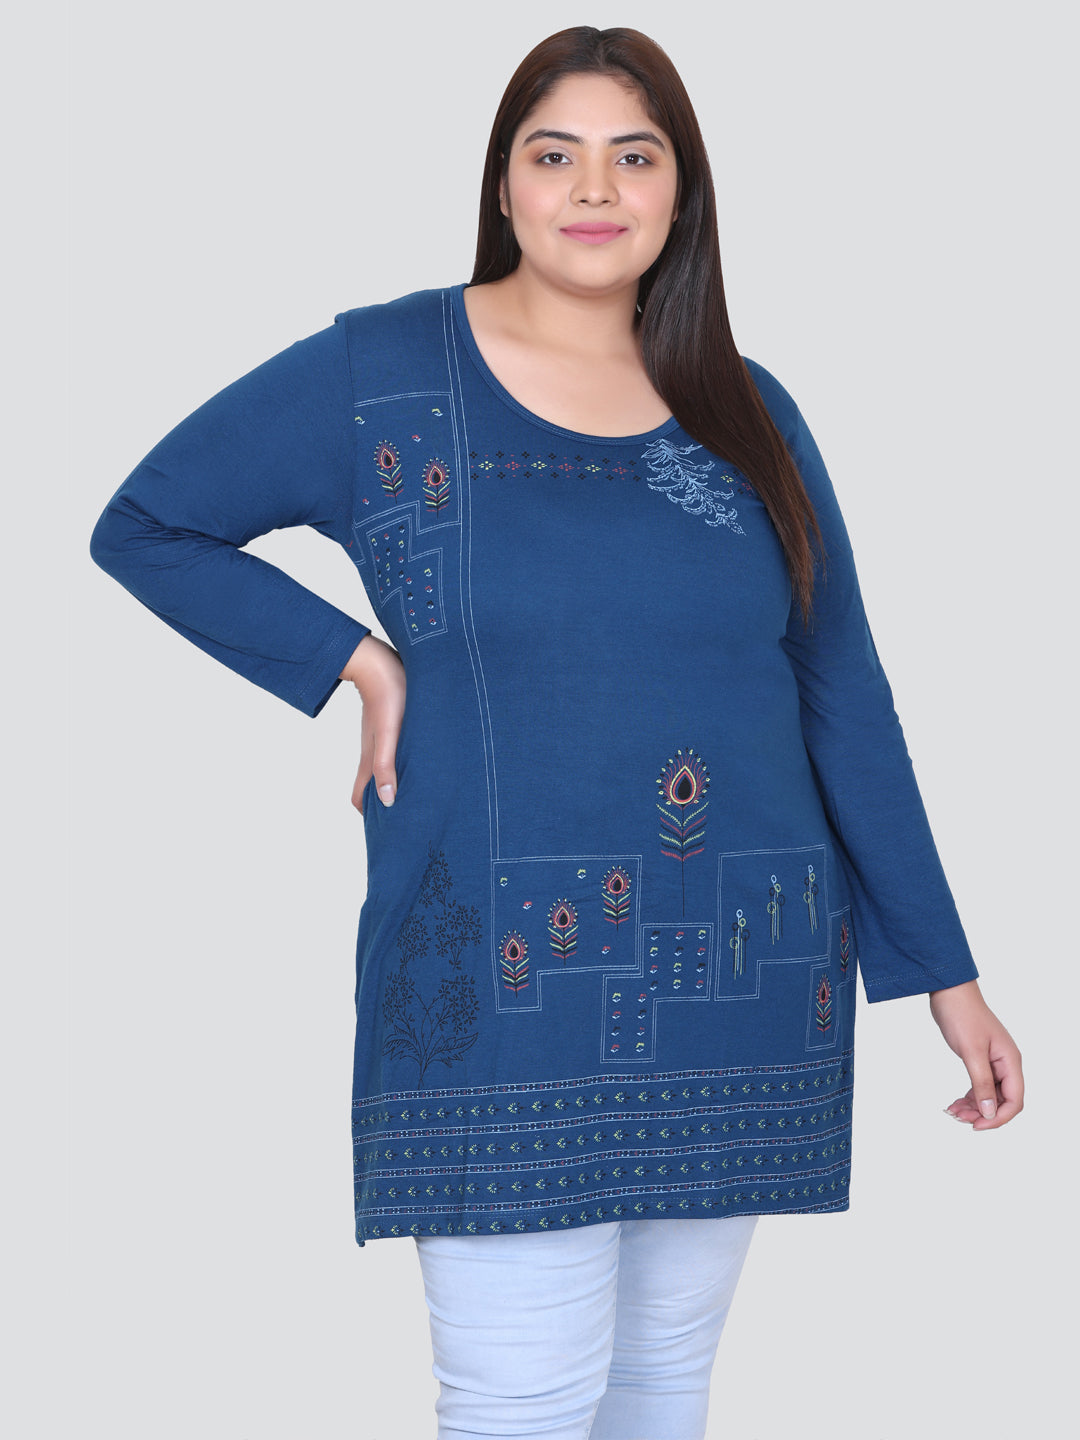 Stylish Teal Blue Plus Size Cotton Long Top For Women (Full Sleeve) Online In India